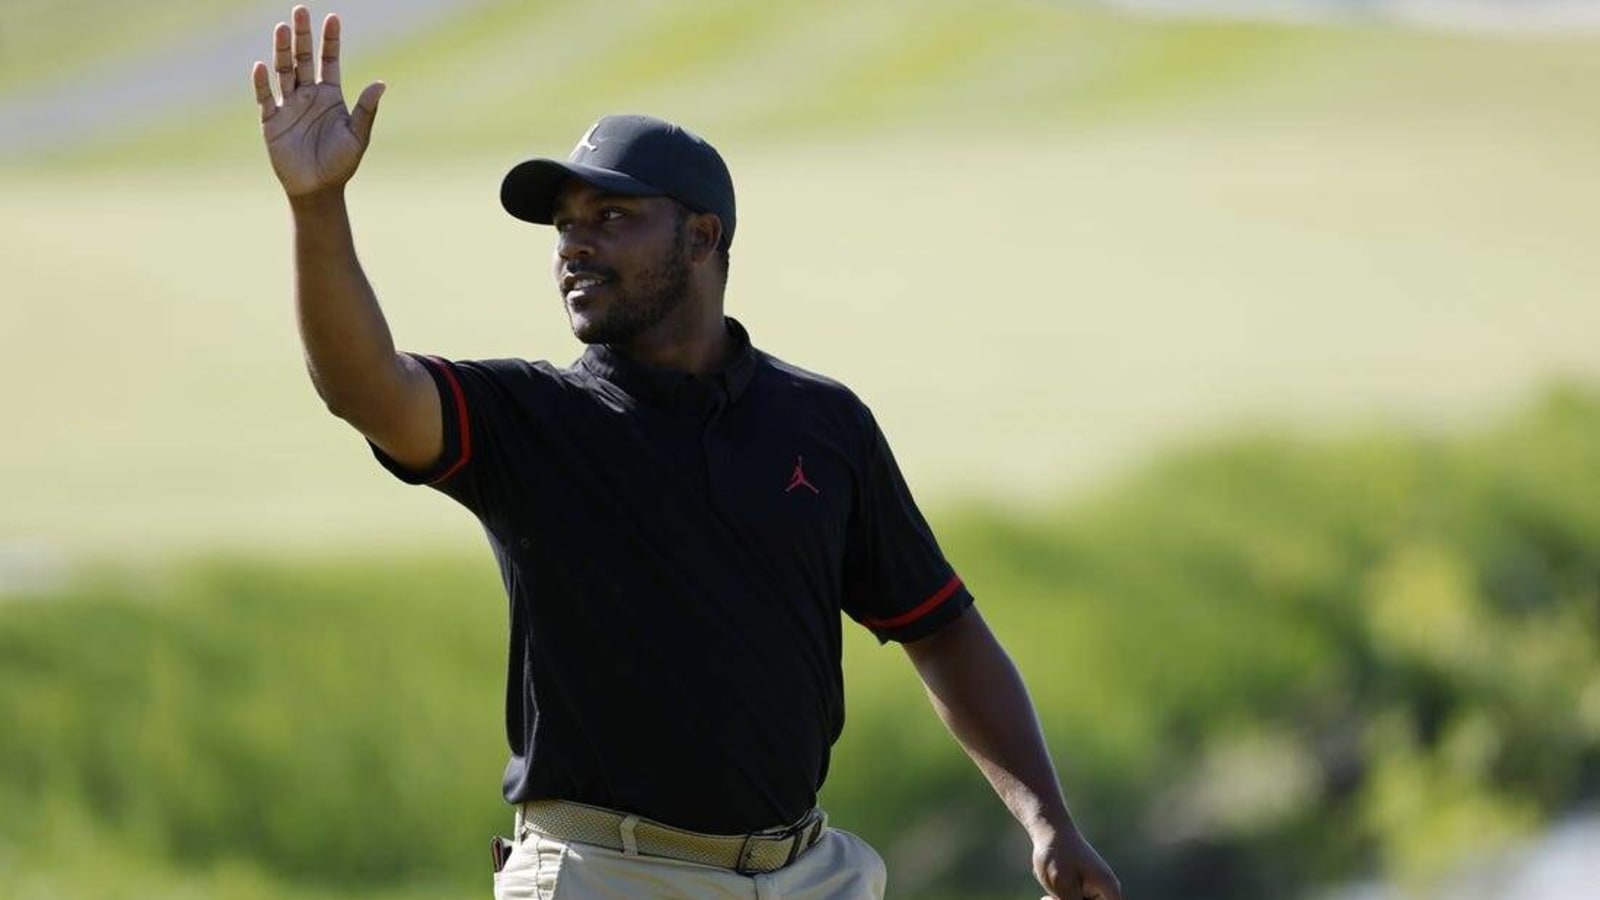 Harold Varner III uses two eagles to take lead at LIV D.C.